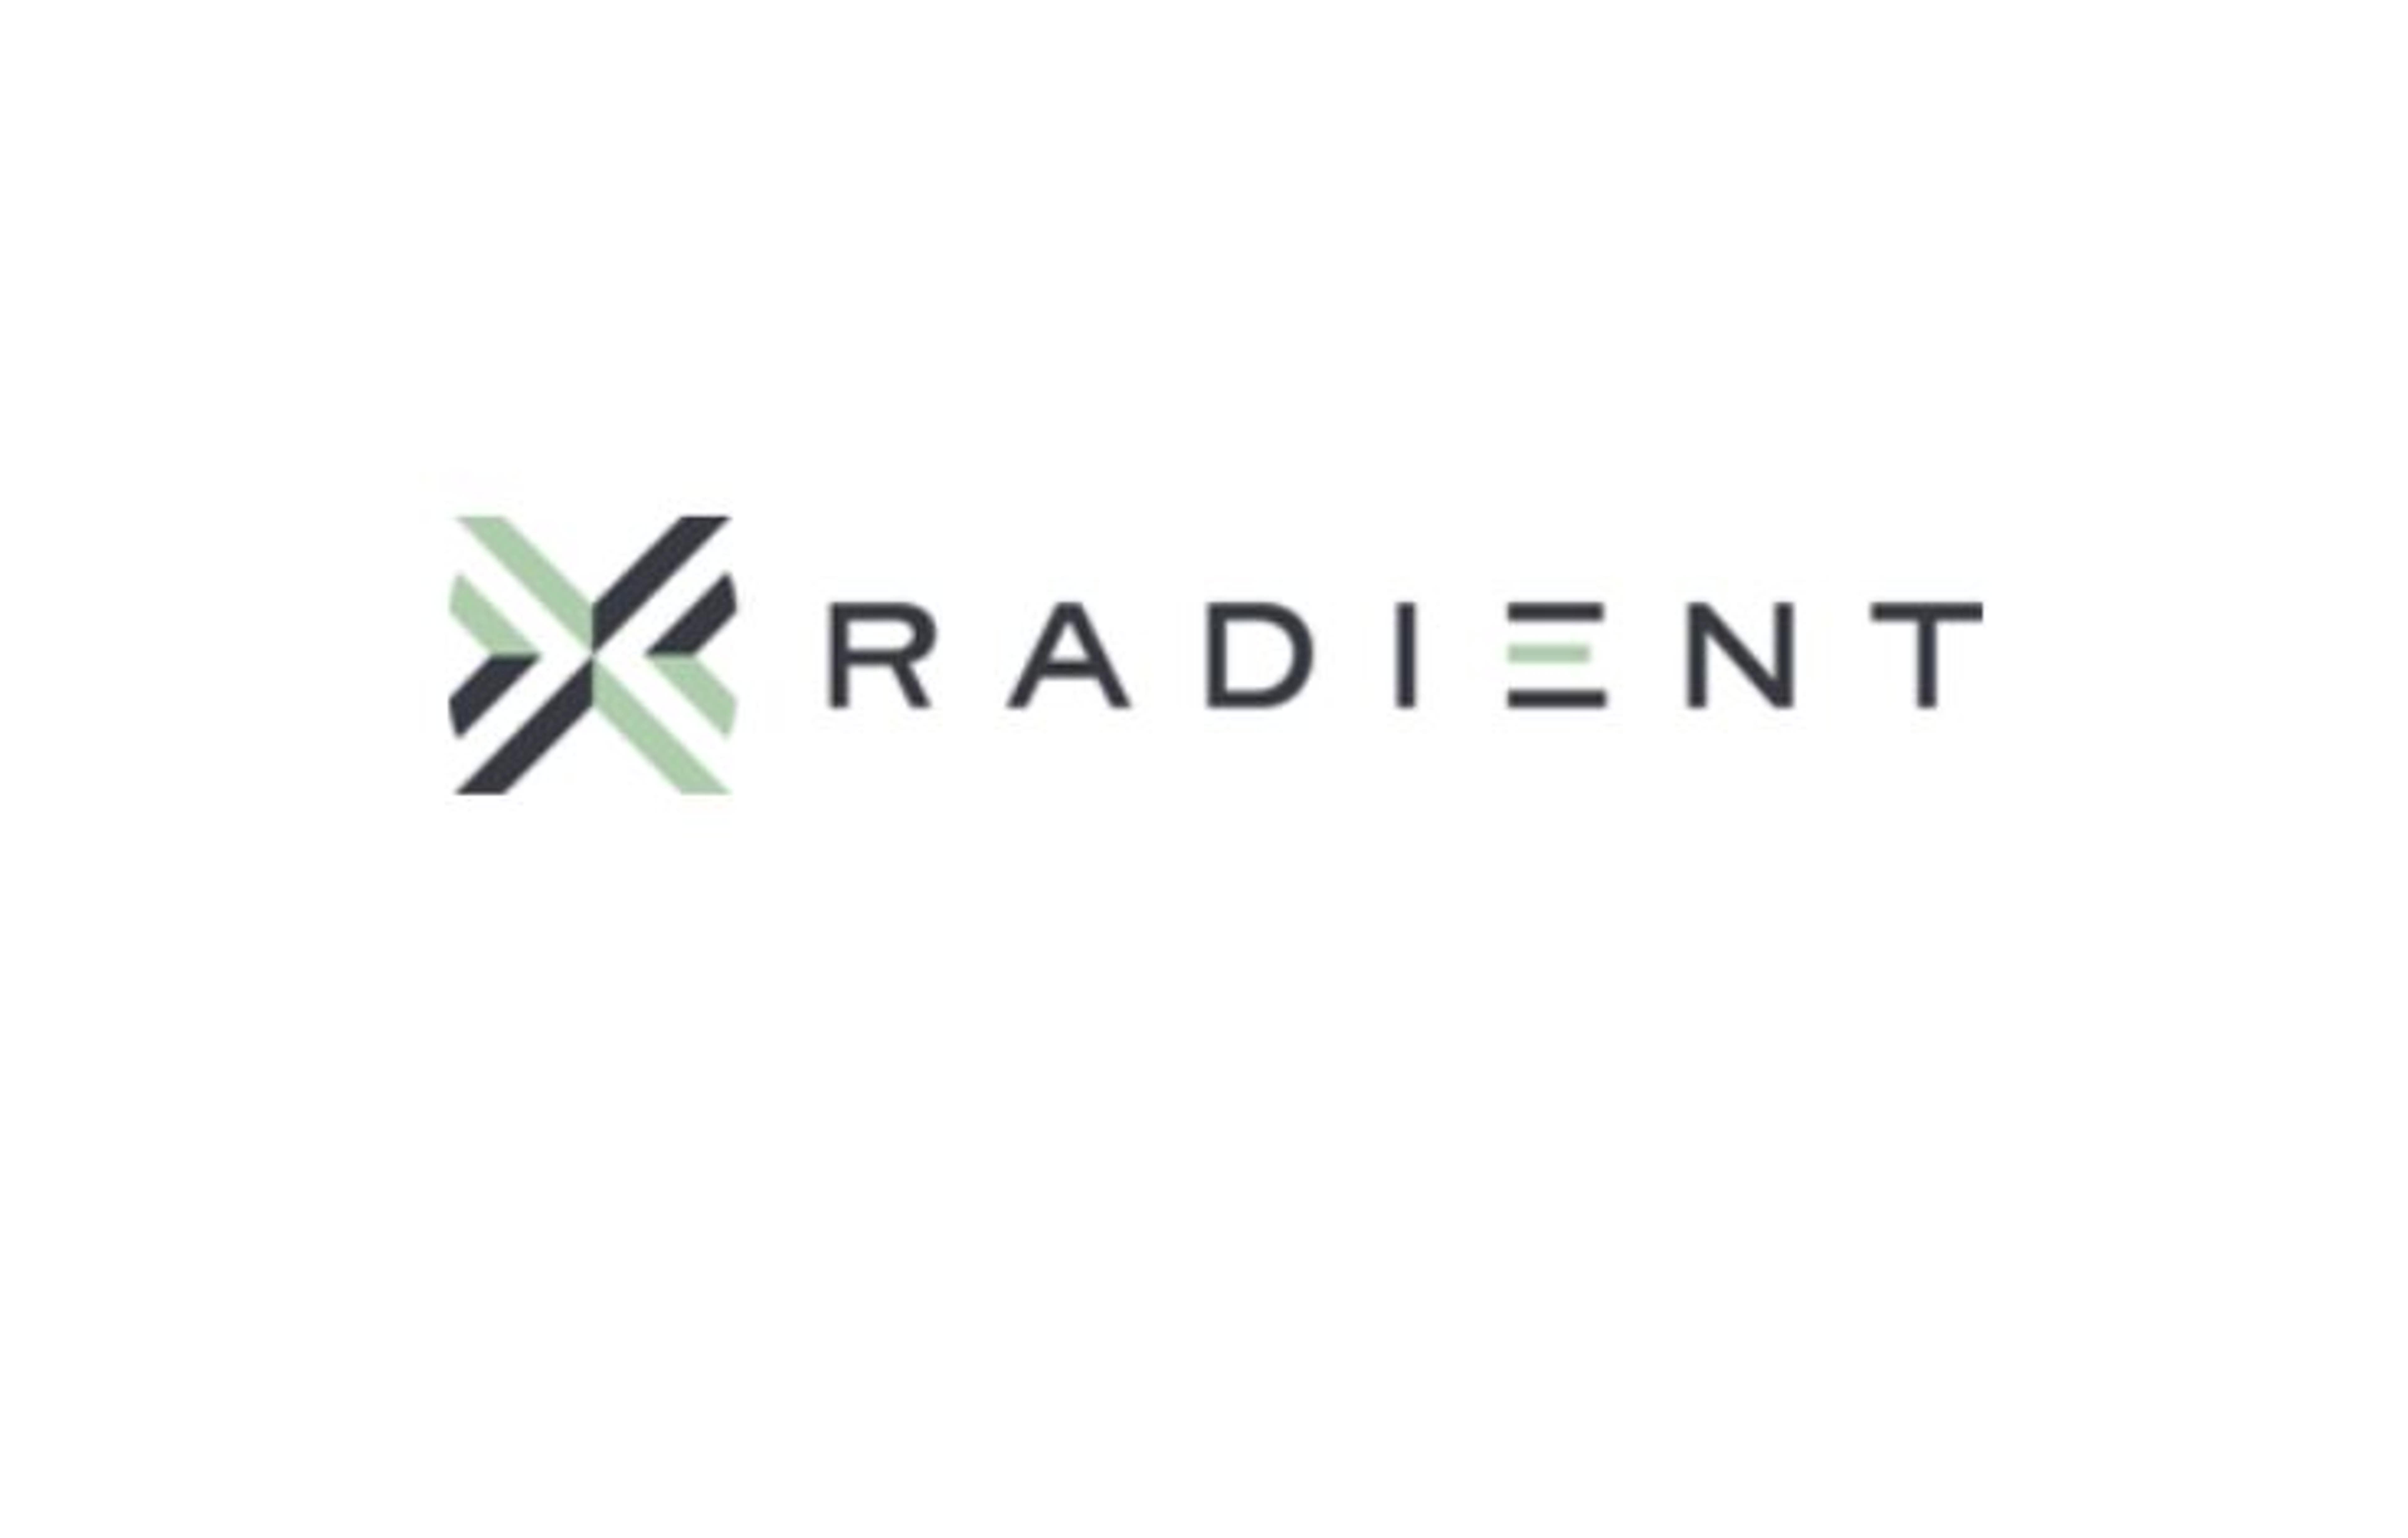 Radient Posts $5.5M Net Loss, Continues To Restructure Operations